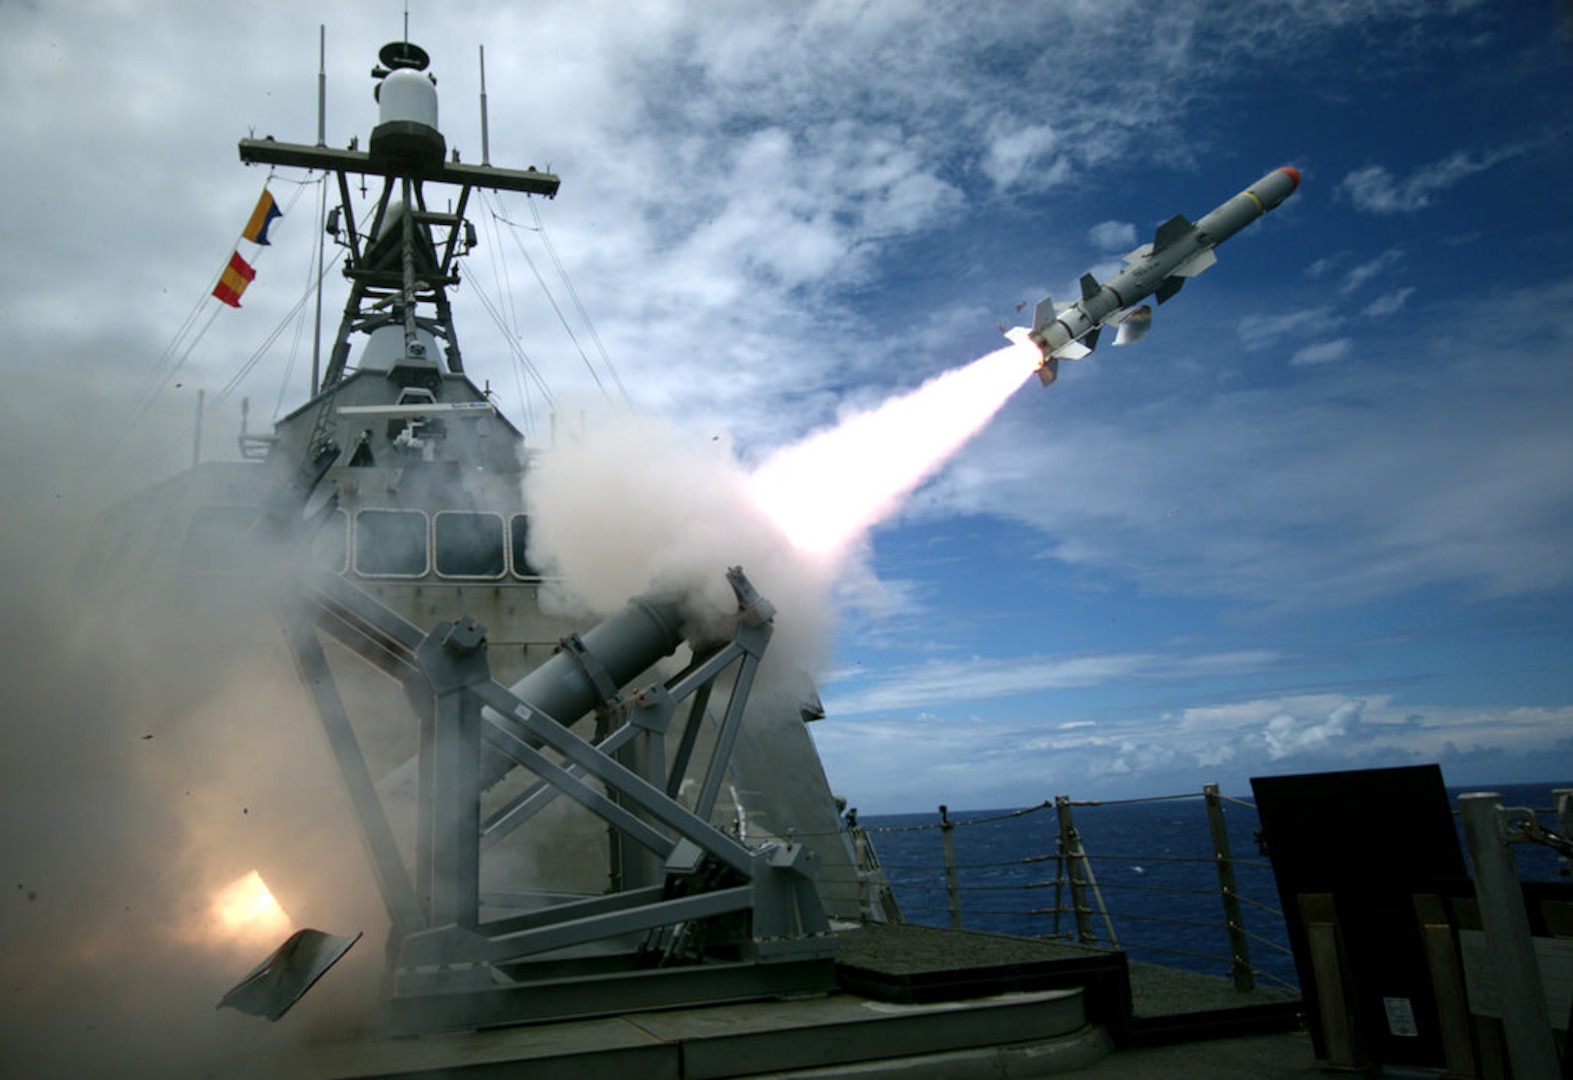 (July 19, 2018) -  USS Coronado (LCS 4), an Independence-variant littoral combat ship, launches a Harpoon Block 1C missile for the first time during exercise Rim of the Pacific (Rim of the Pacific). Twenty-six nations, 40 ships and submarines, more than 200 aircraft and 25,000 personnel are participating in RIMPAC from June 30 to Aug. 4, in and around the Hawaiian Islands and Southern California. The world's largest international maritime exercise, RIMPAC provides a unique training opportunity that helps participants foster and sustain the cooperative relationships that are critical to ensuring the safety of sea lanes and security on the world's oceans. RIMPAC 2016 is the 25th exercise in the series that began in 1971.